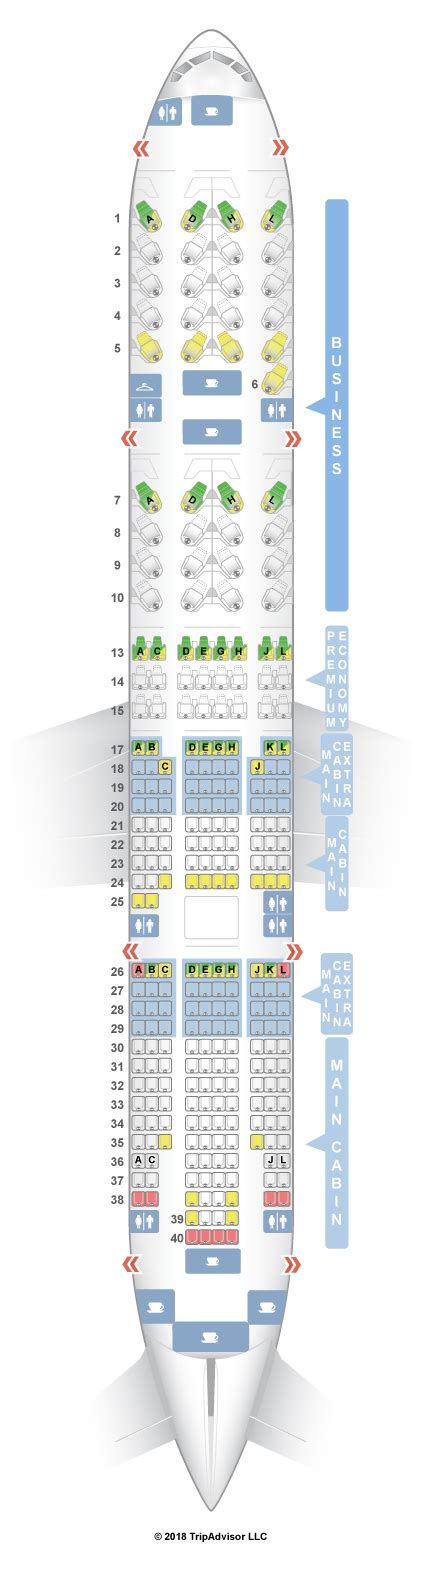 Contact information for renew-deutschland.de - Flying in seat 17B on a American Airlines Boeing 777-200 soon? Read reviews of seat 17B and find a better seat with our American Airlines seating charts.